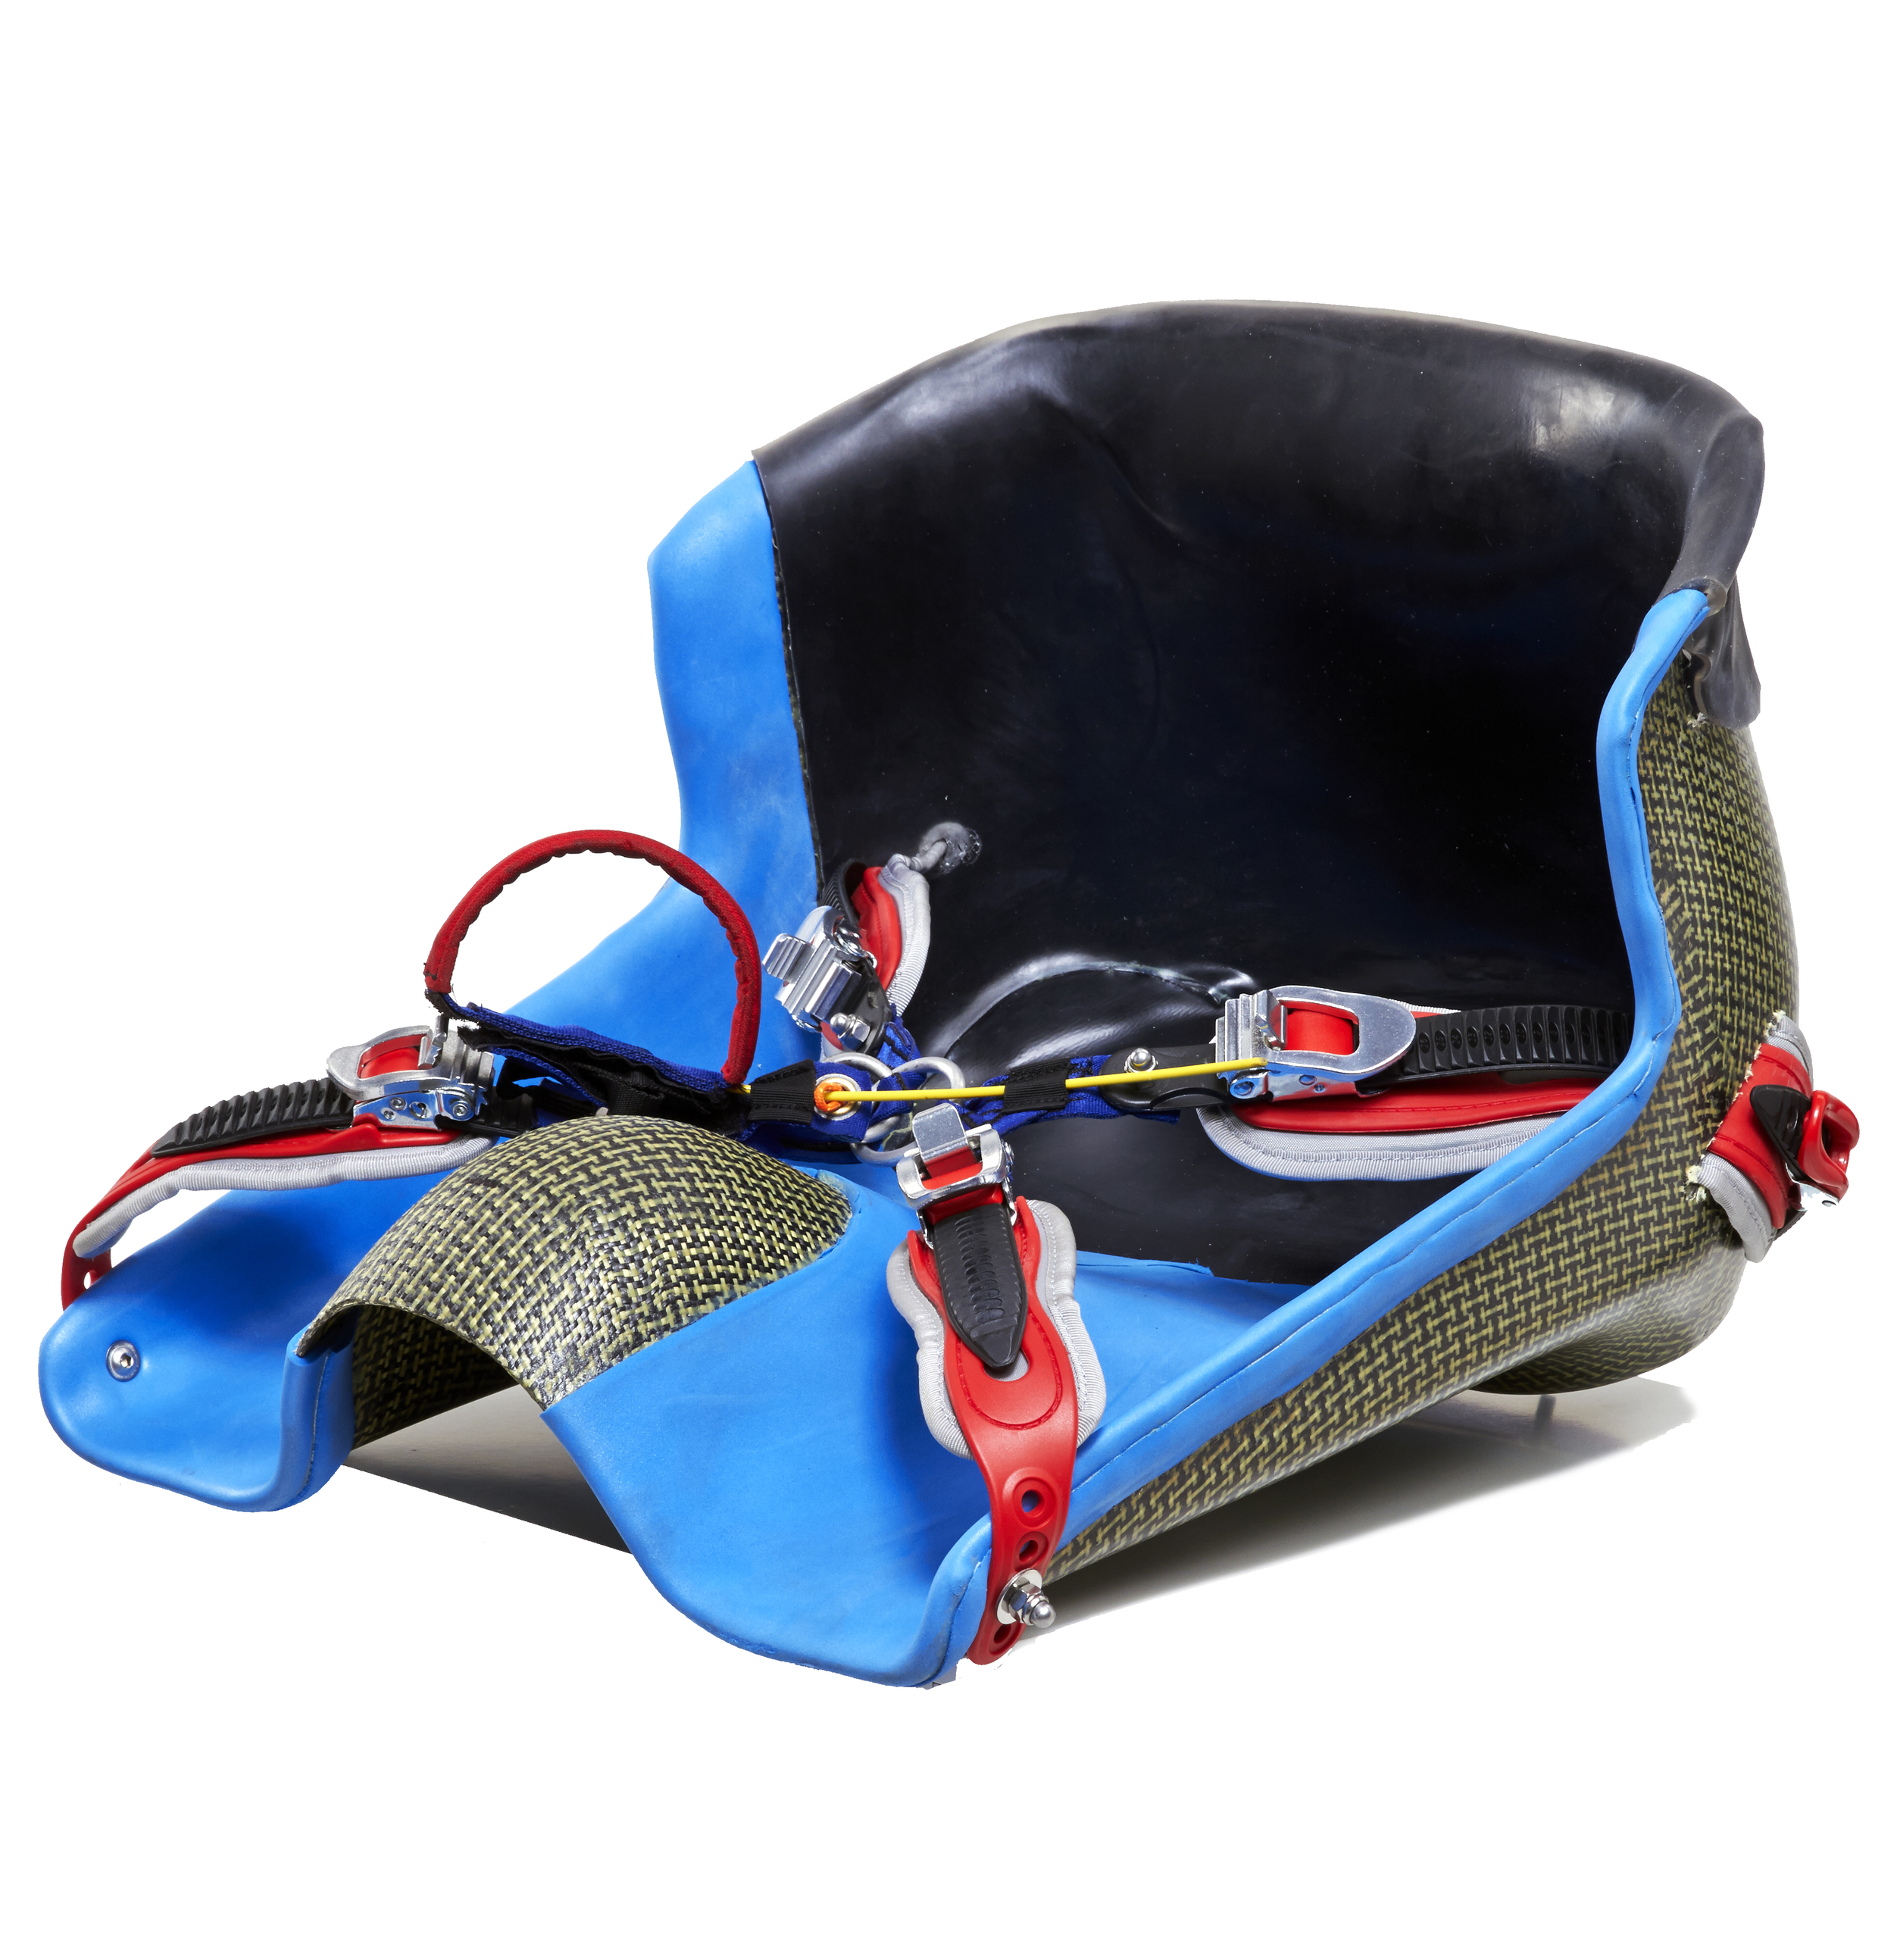  Thanks to professional cooperation as well as the special boat adjustments such as GALASPORT seat and MOVE TECH easy to release fastening system, there are now new opportunities for handicapped people in the range of the extreme/action sports – the 